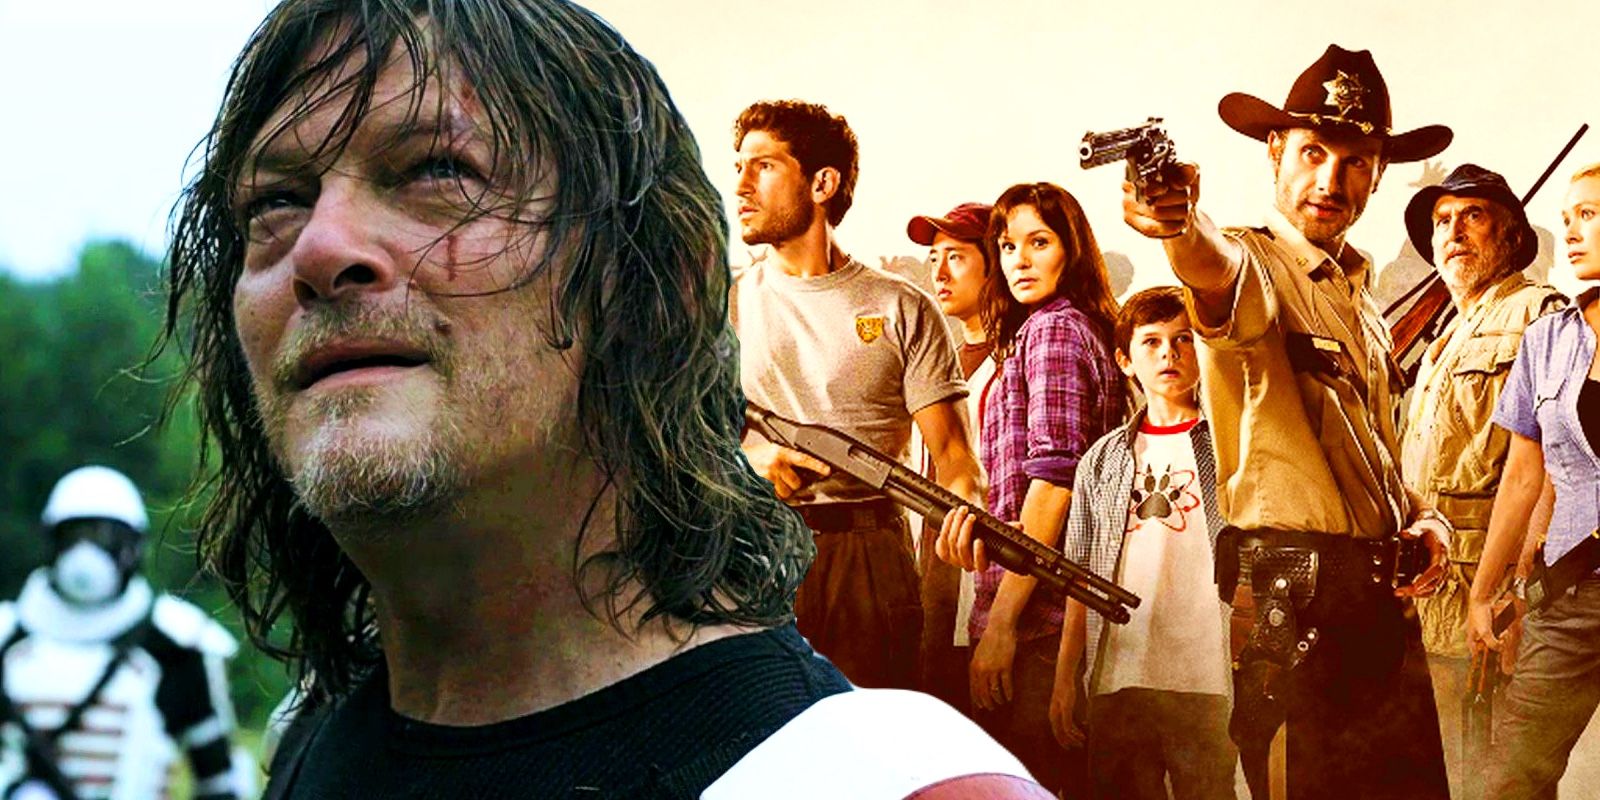 The Walking Dead Season 11 Copies From Every Season To Set Up Its Endgame